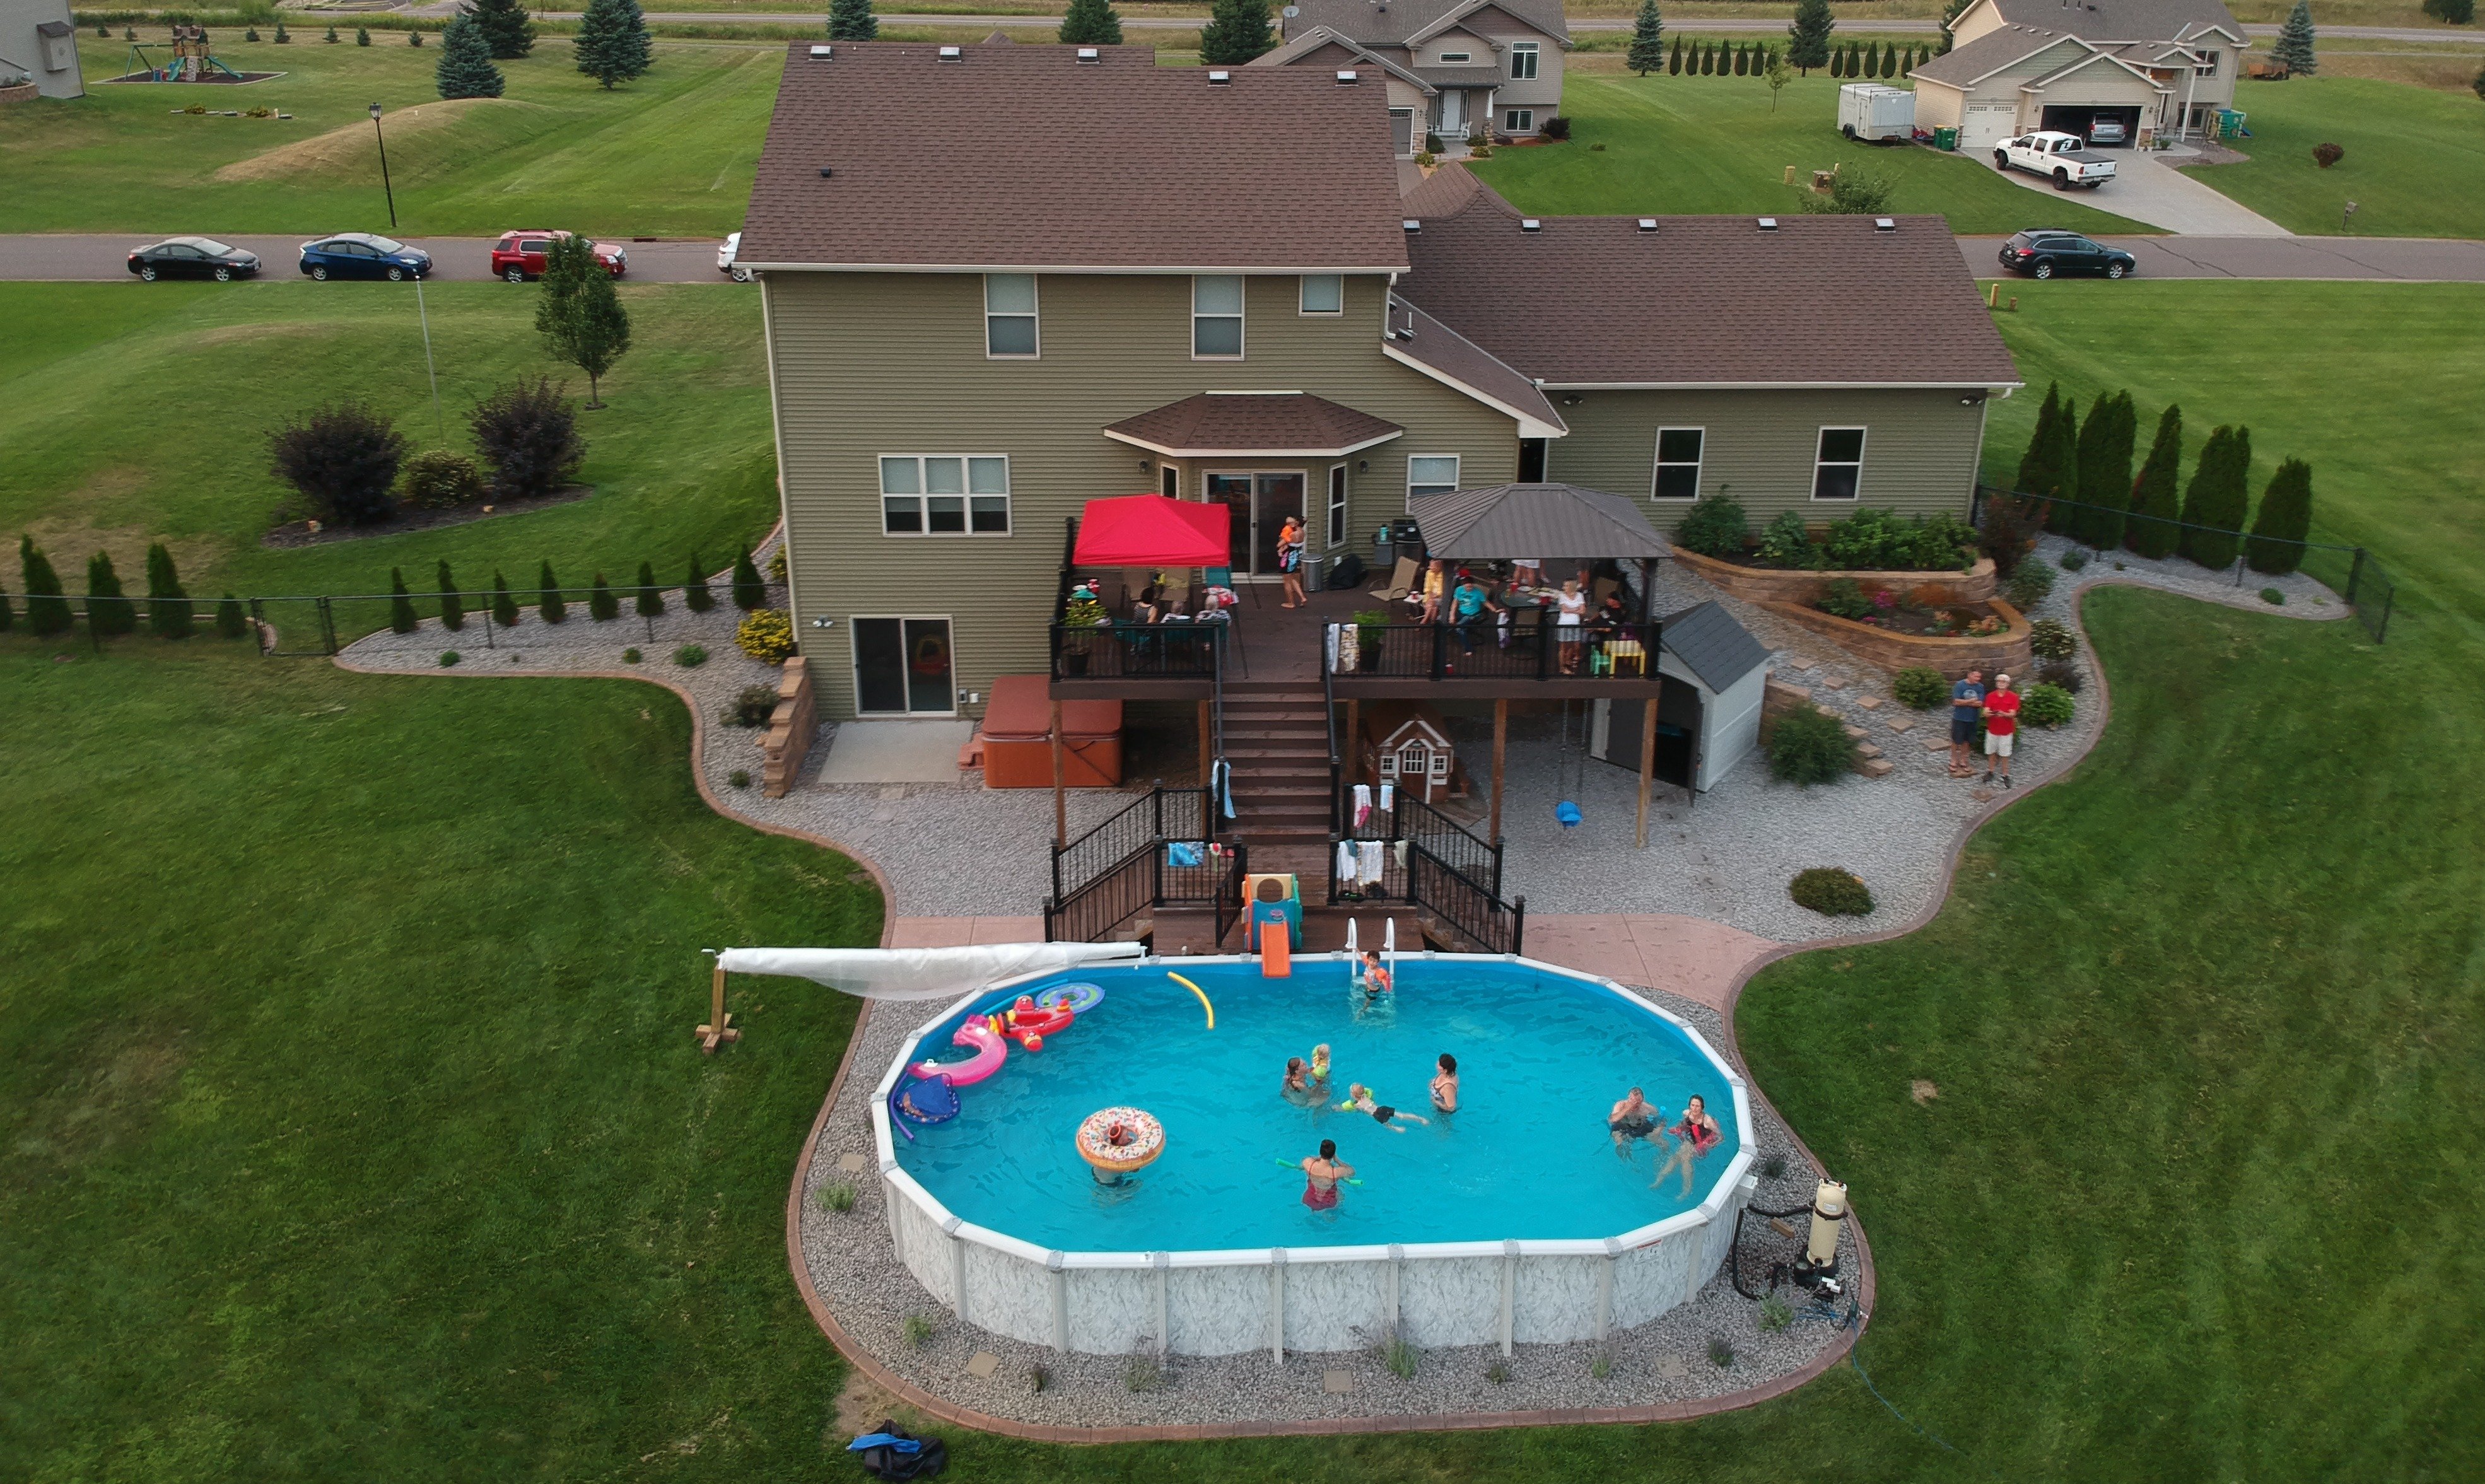 Above Ground Pool Cost To Build, How Much Does An Above Ground Pool With A Deck Cost